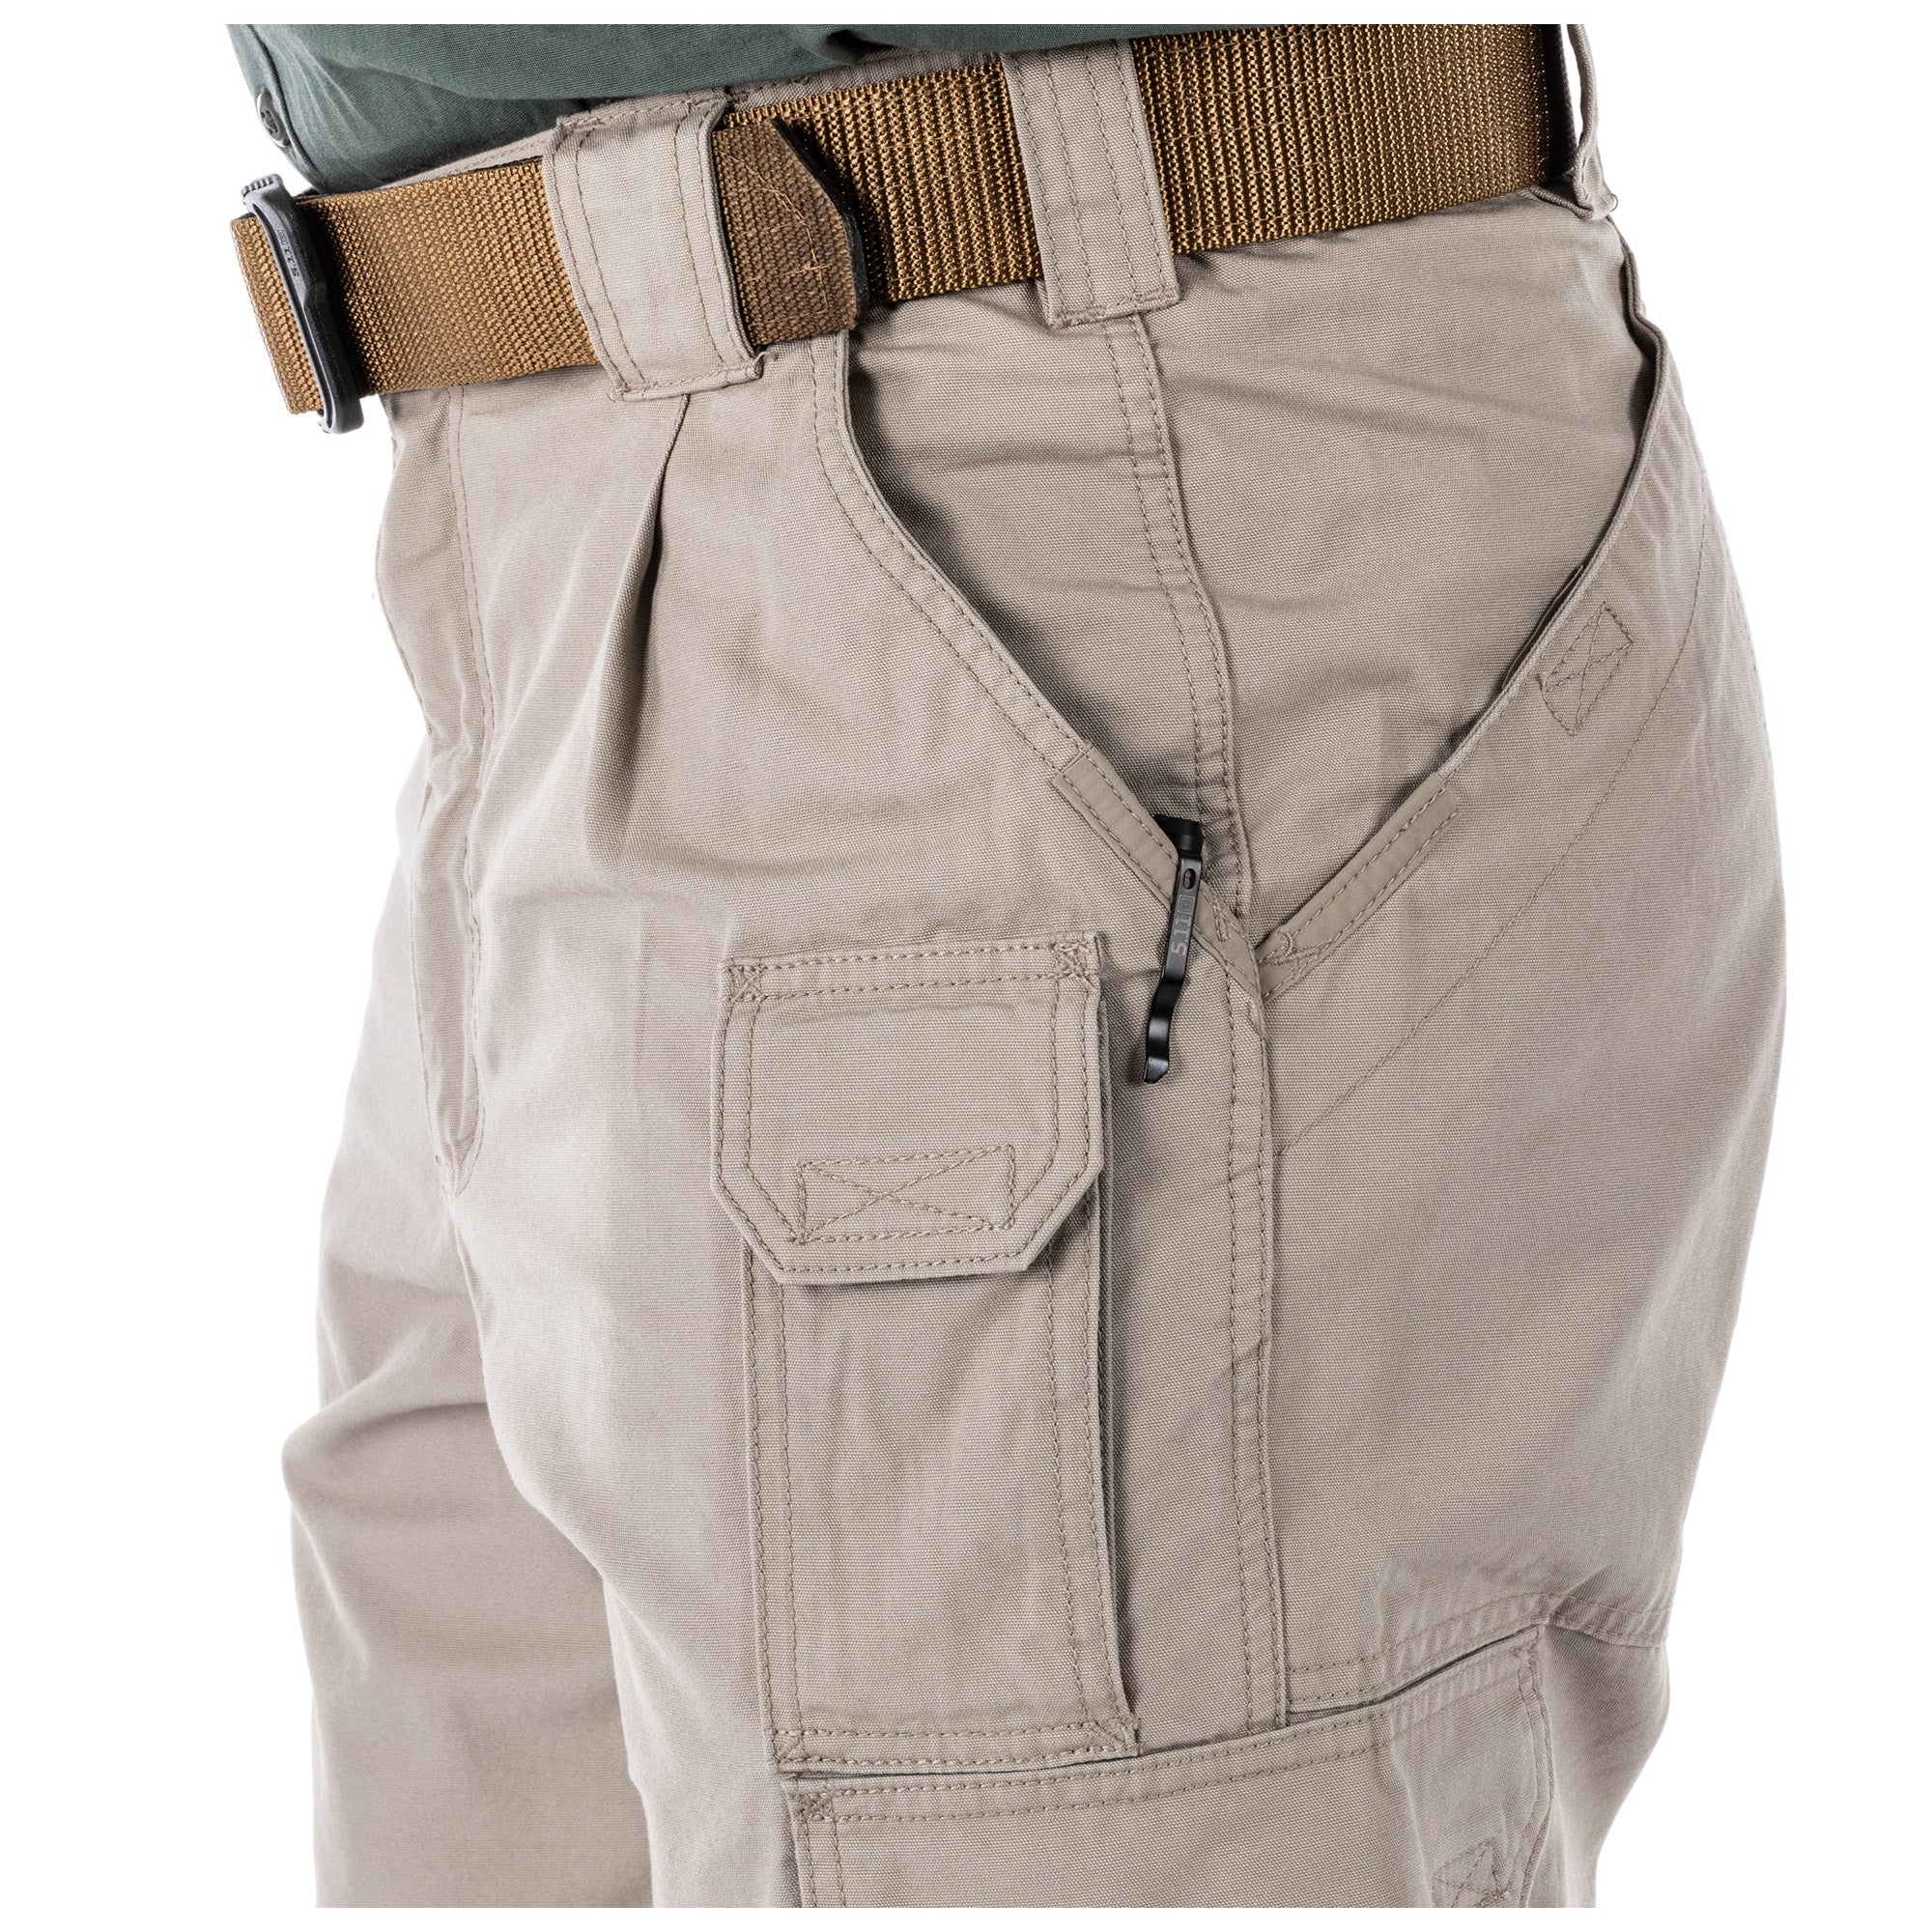 Apex Pant: High-Performance Tactical Pants | 5.11 Tactical® | 5.11® Tactical  Official Site